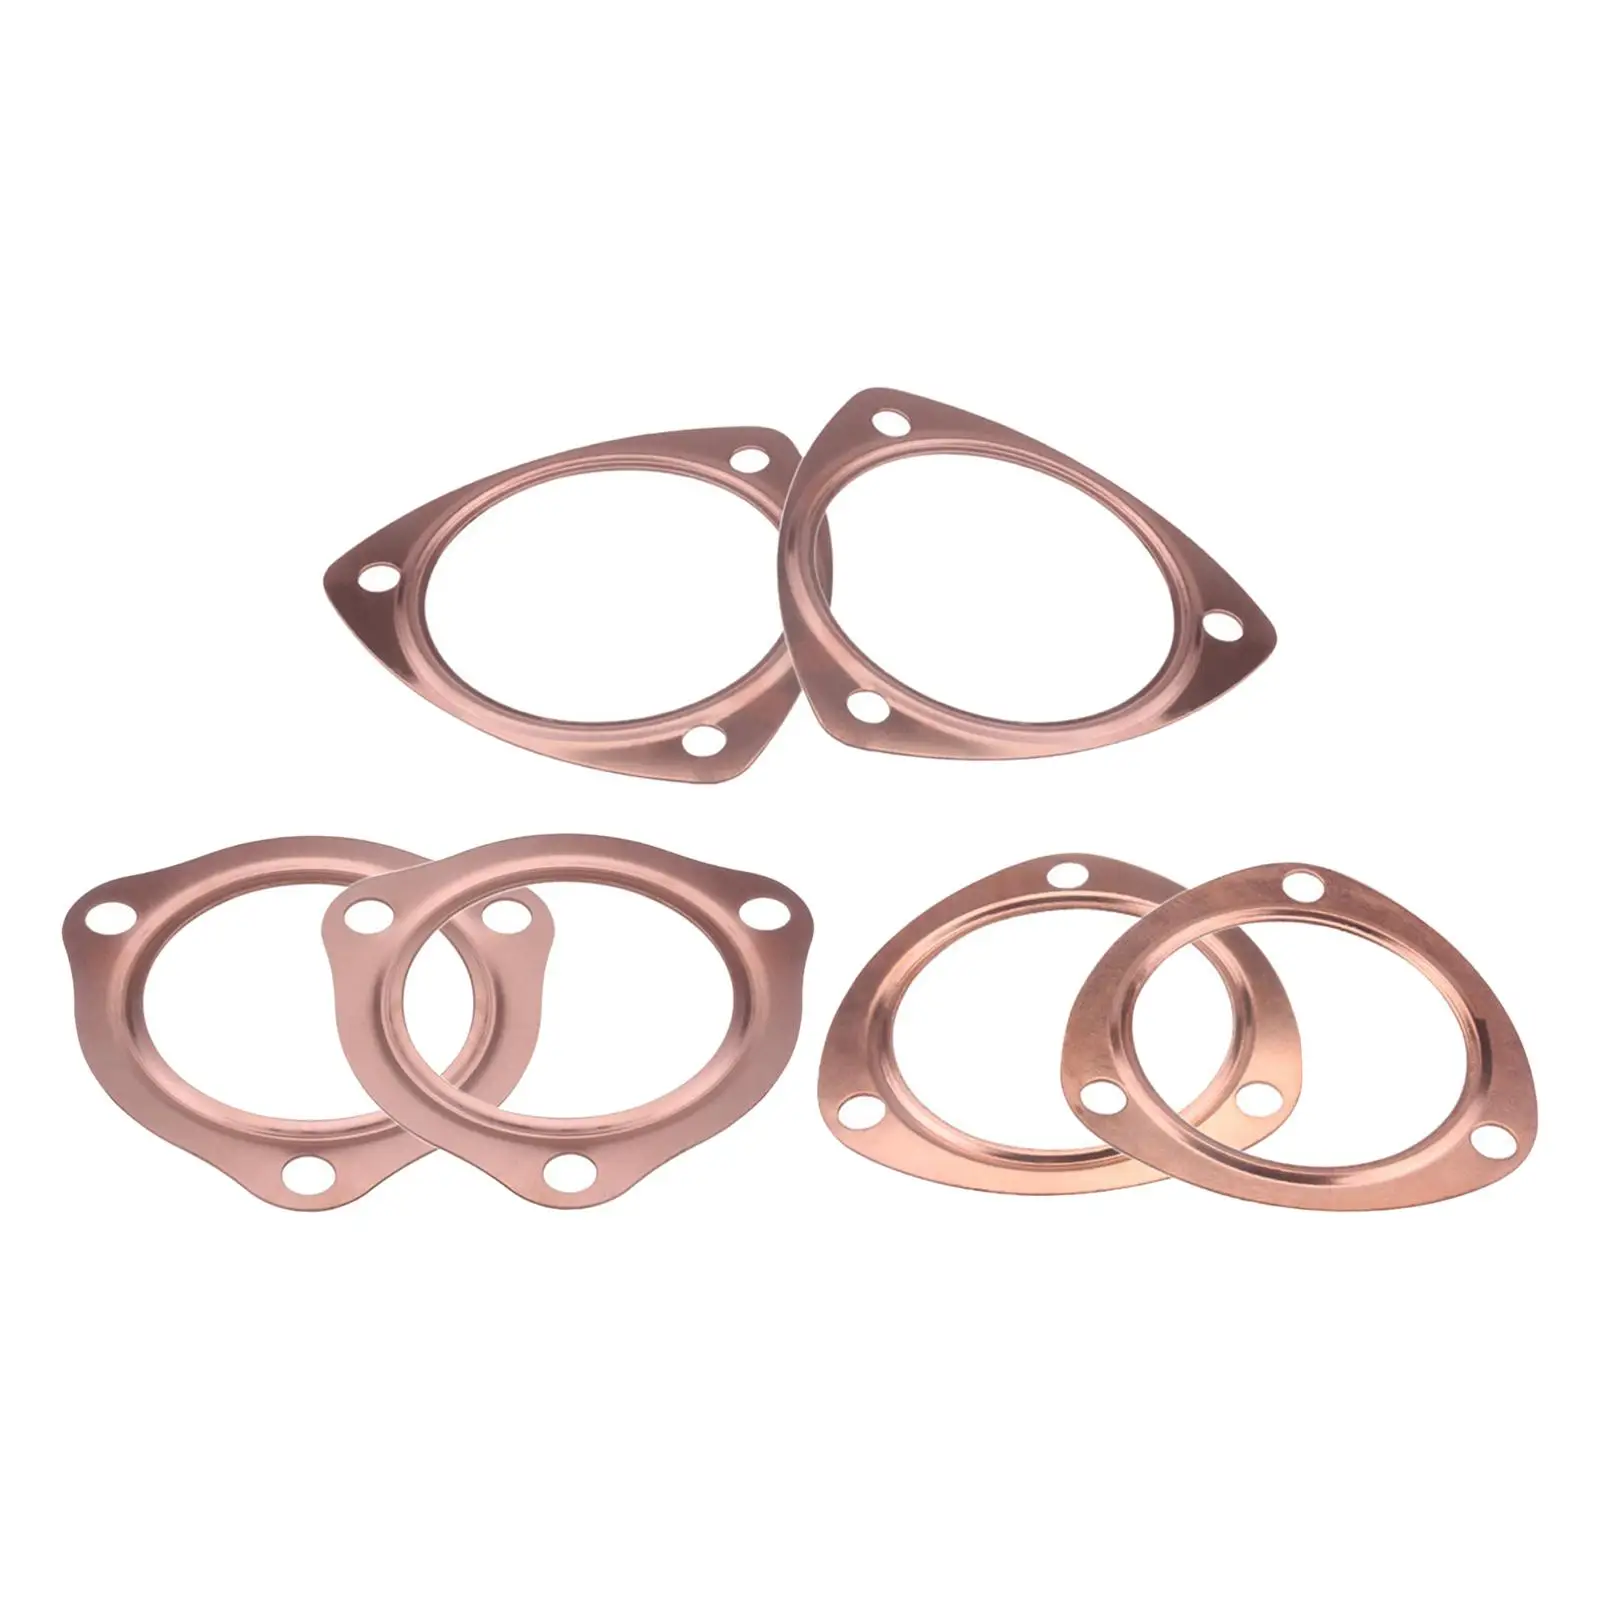 Copper Collector Gasket Copper Header Exhaust Collector Gaskets Wear Resisting for Sbc Bbc 302 350 454 Automotive Accessory